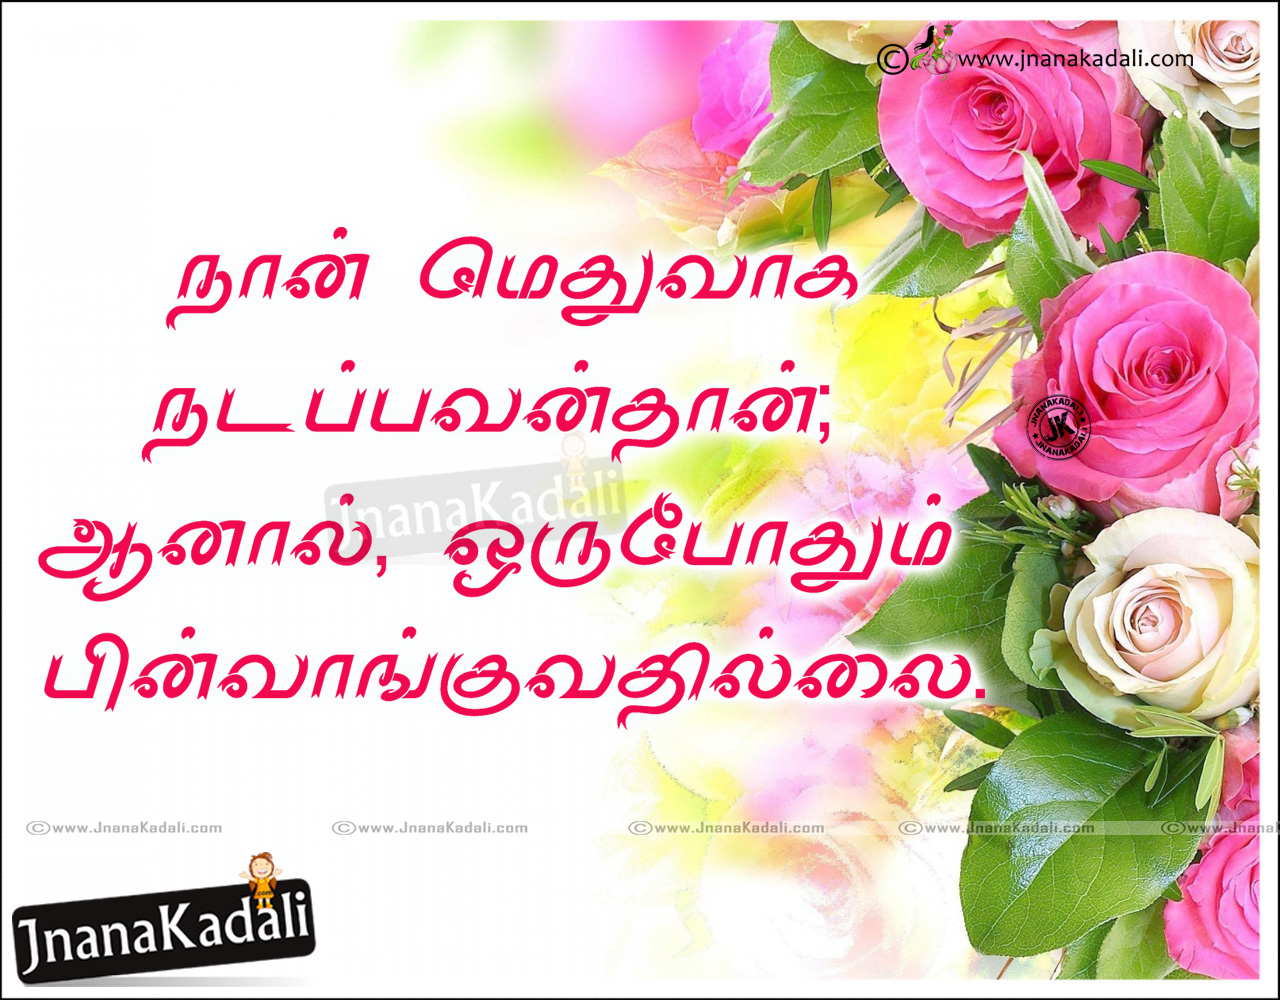 Life inspirational success quotes Messages in Tamil Language hd ...